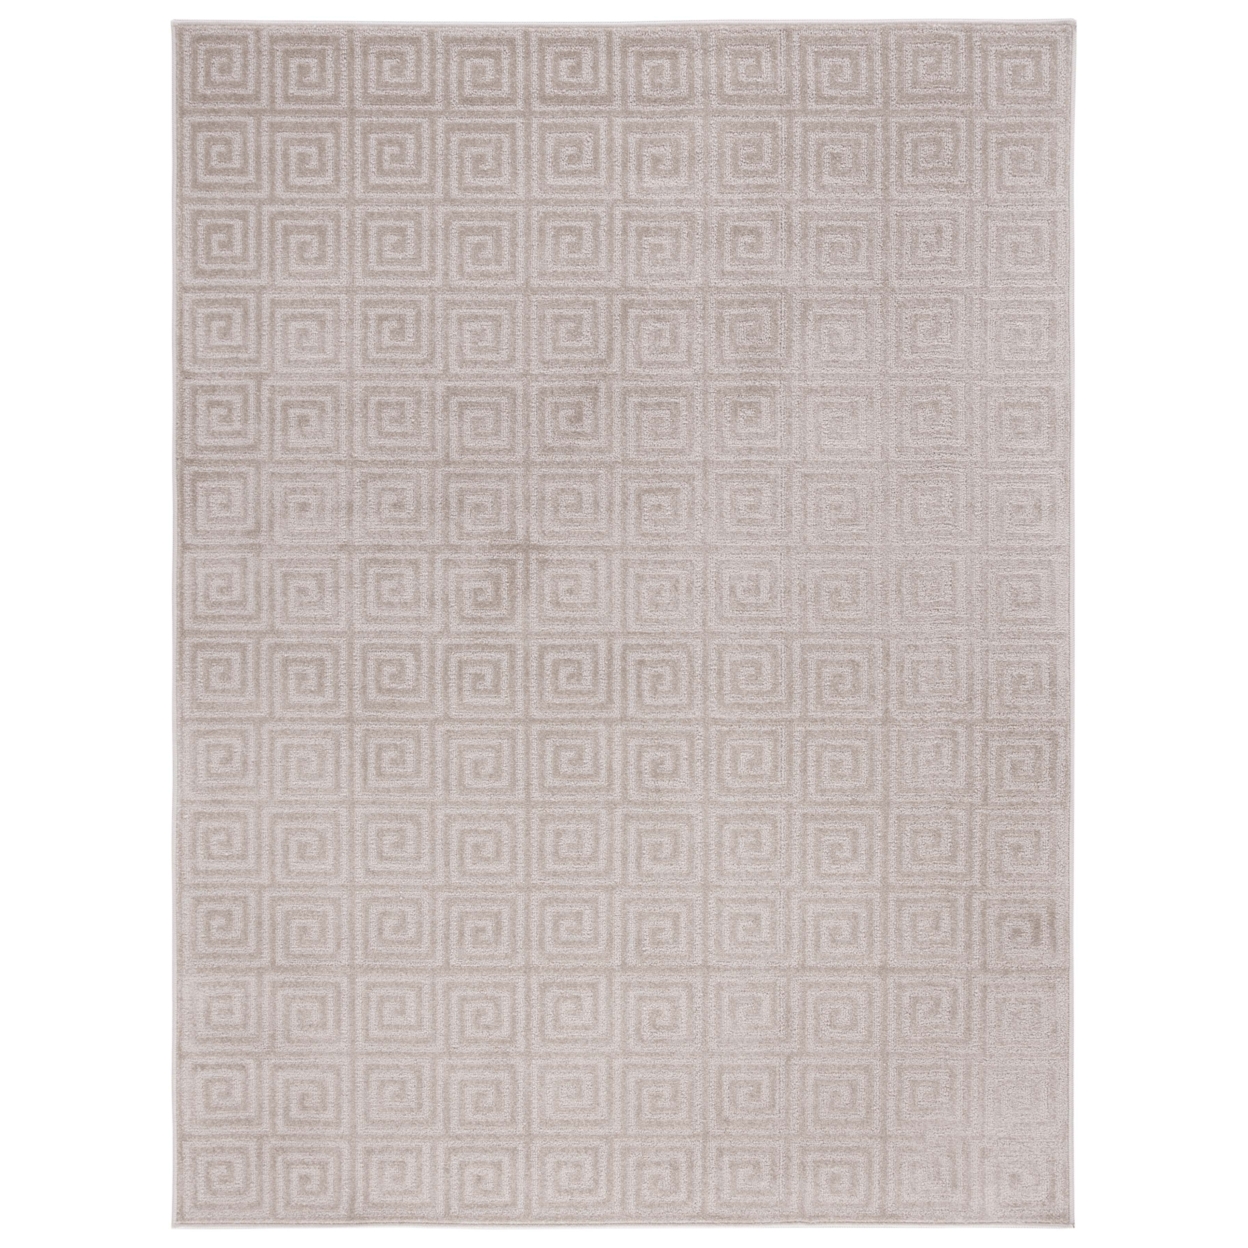 Safavieh PNS412B Pattern And Solid Beige - Beige / Ivory, 8' X 10' Rectangle